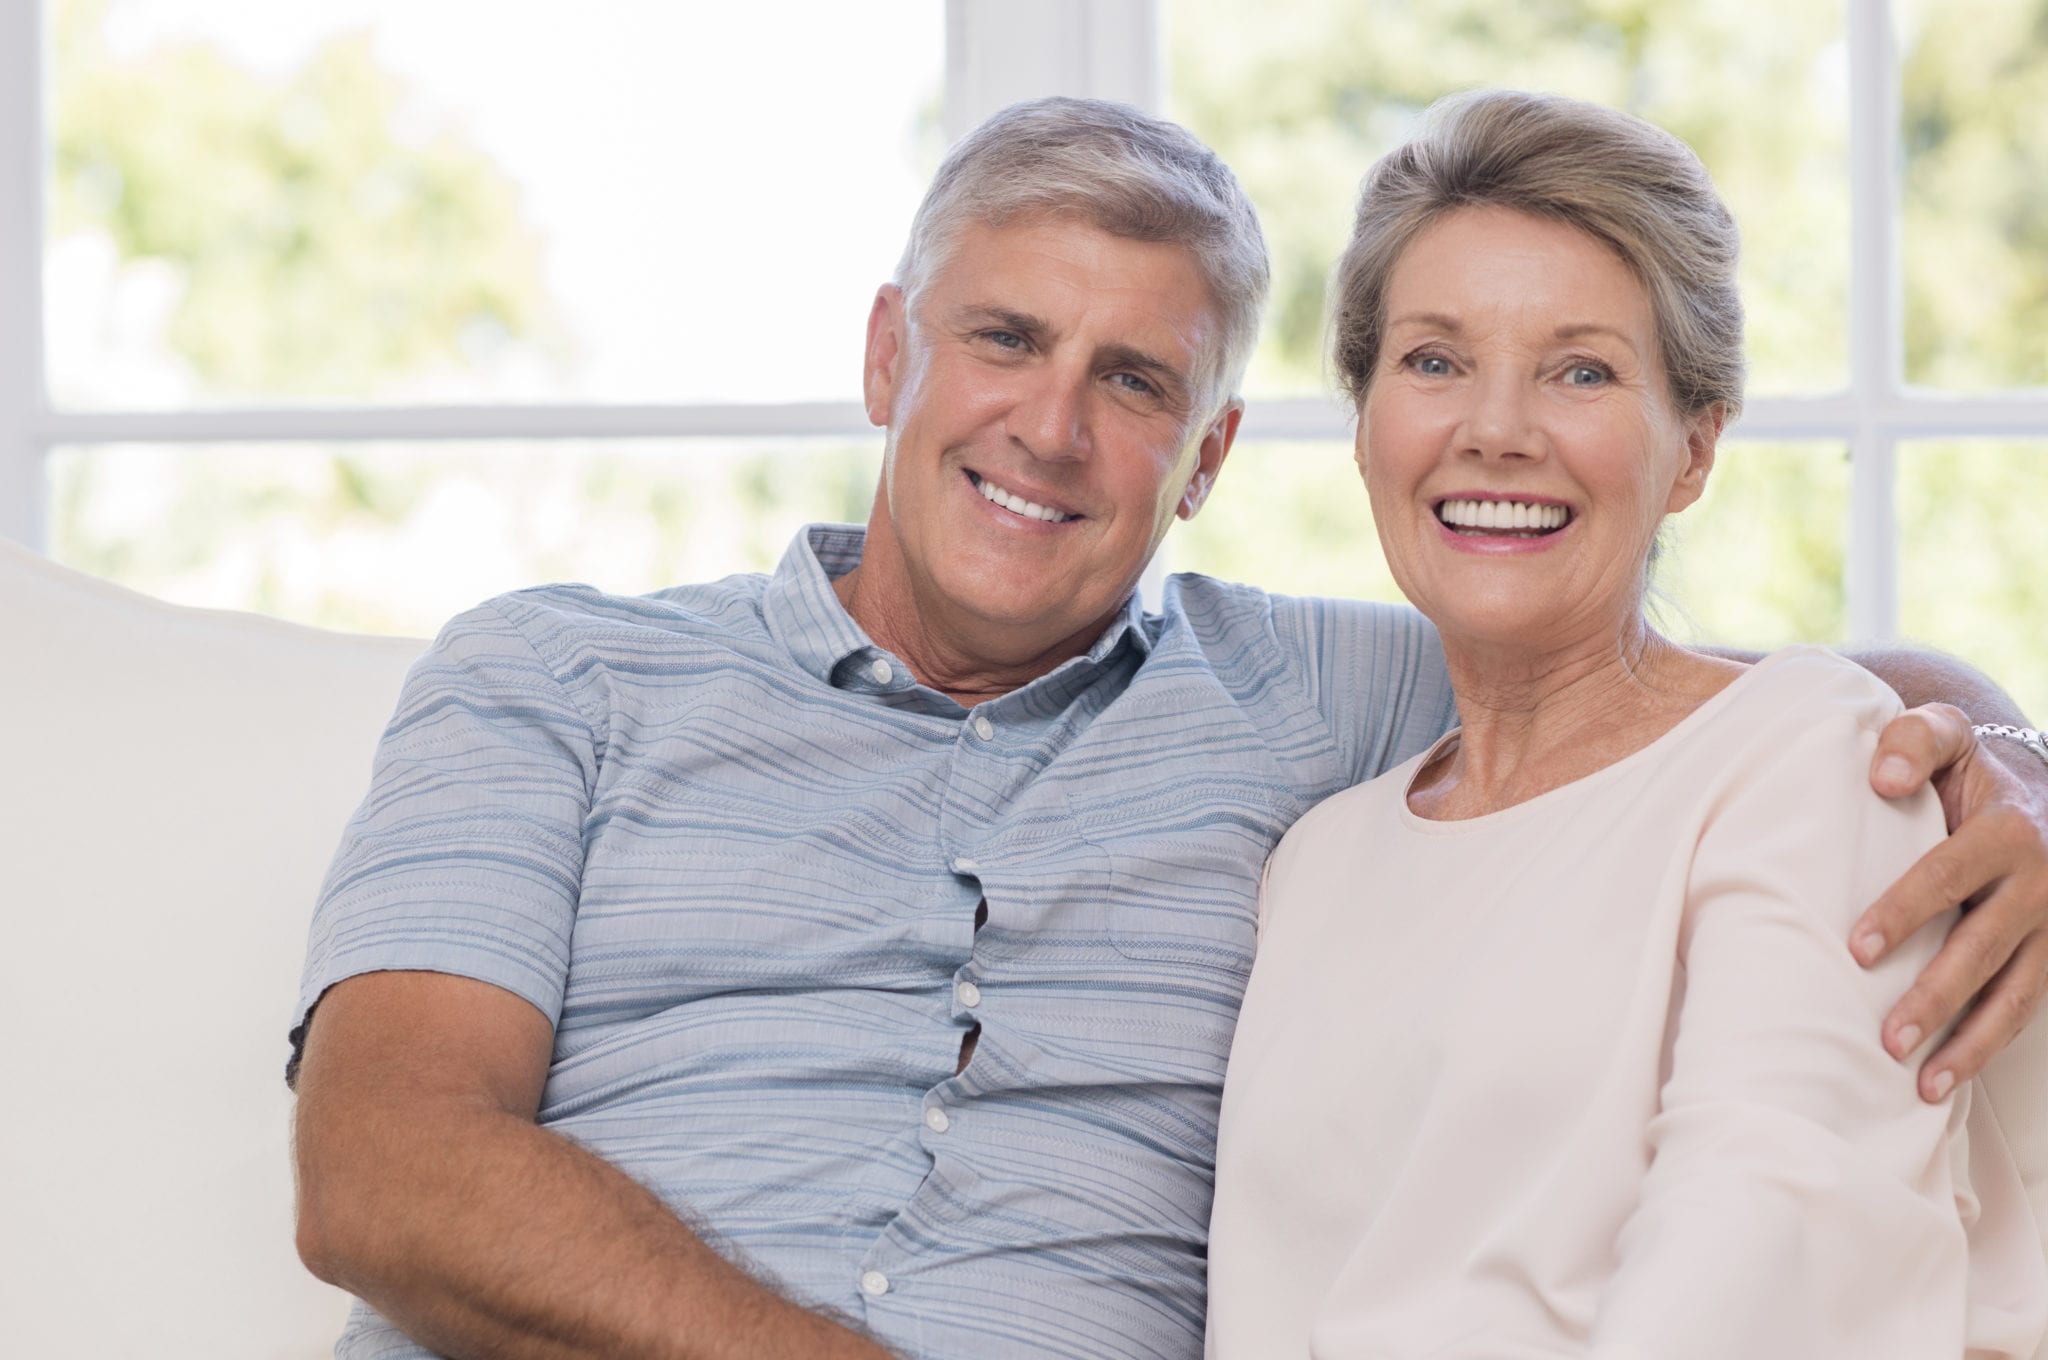 Mature Couple Embracing On Couch Copy